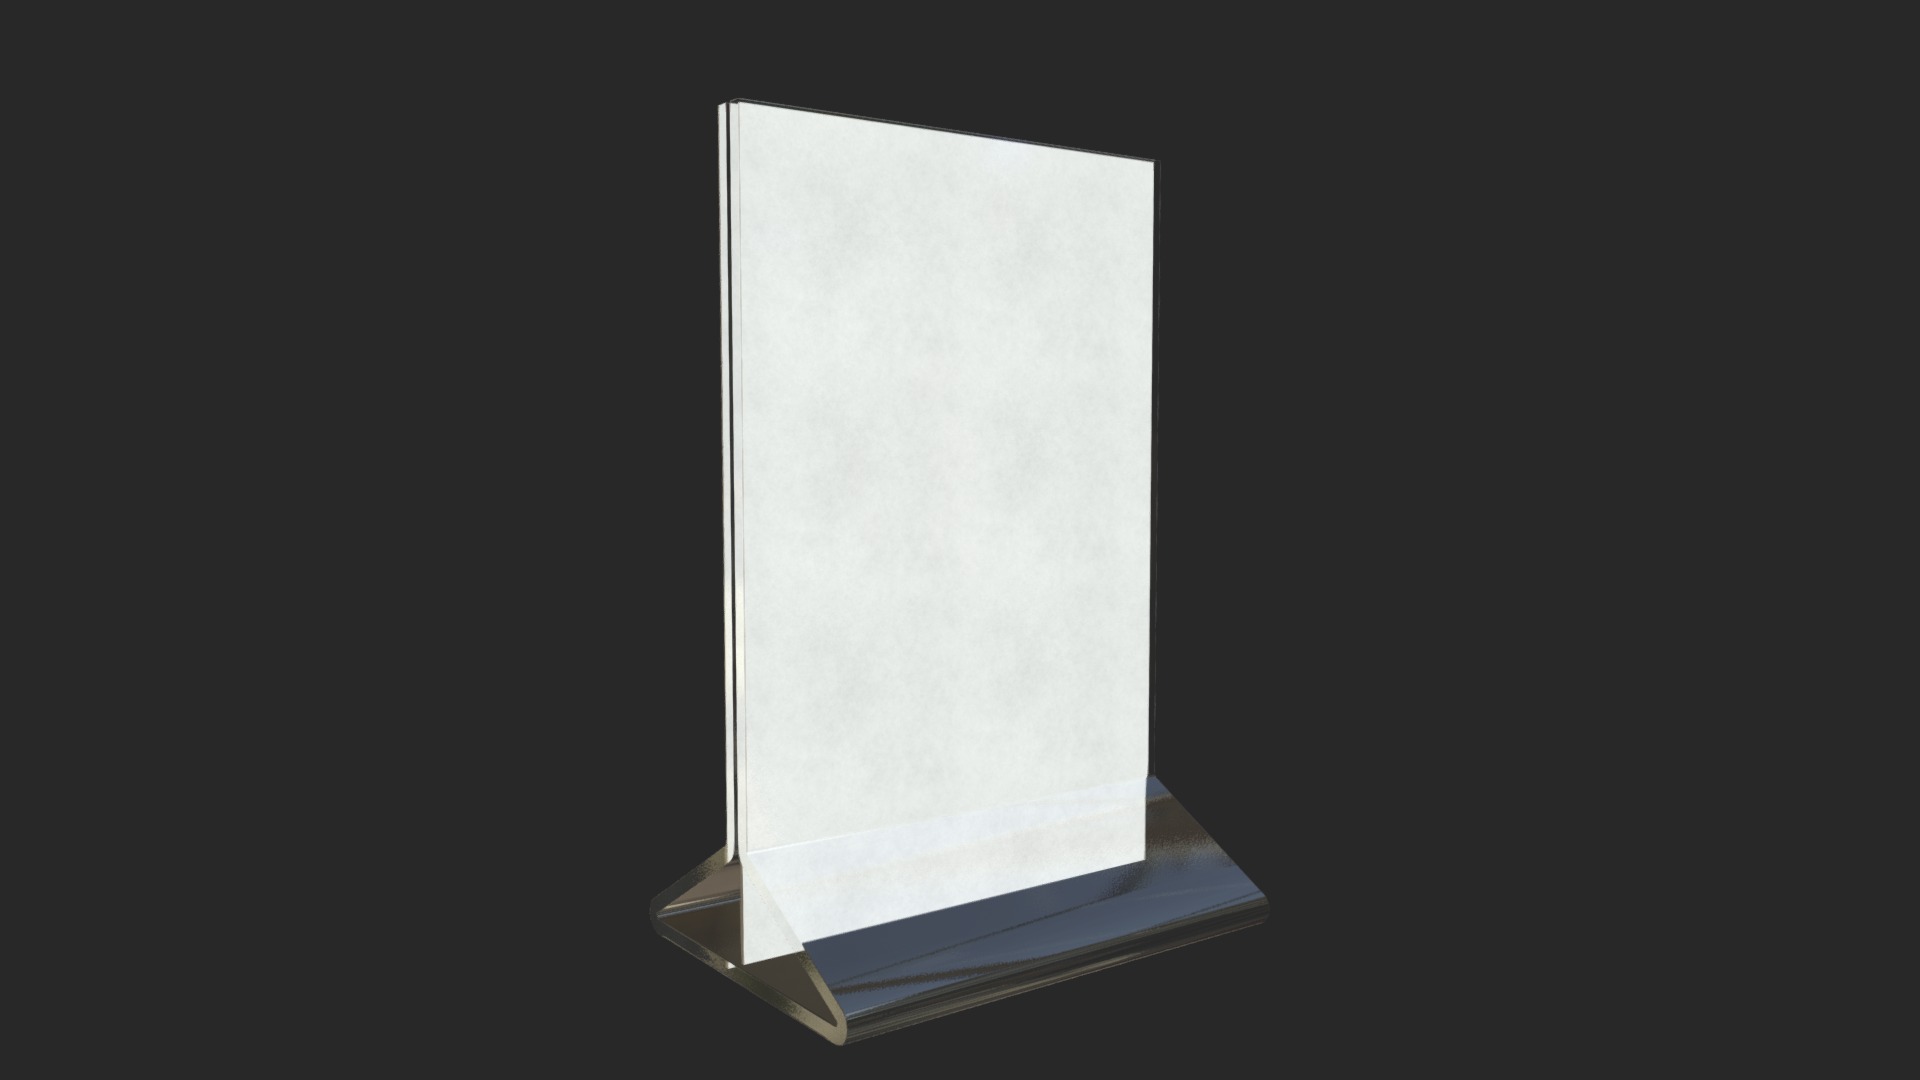 3D model Table tent template 4 - This is a 3D model of the Table tent template 4. The 3D model is about a book open with a blank page.